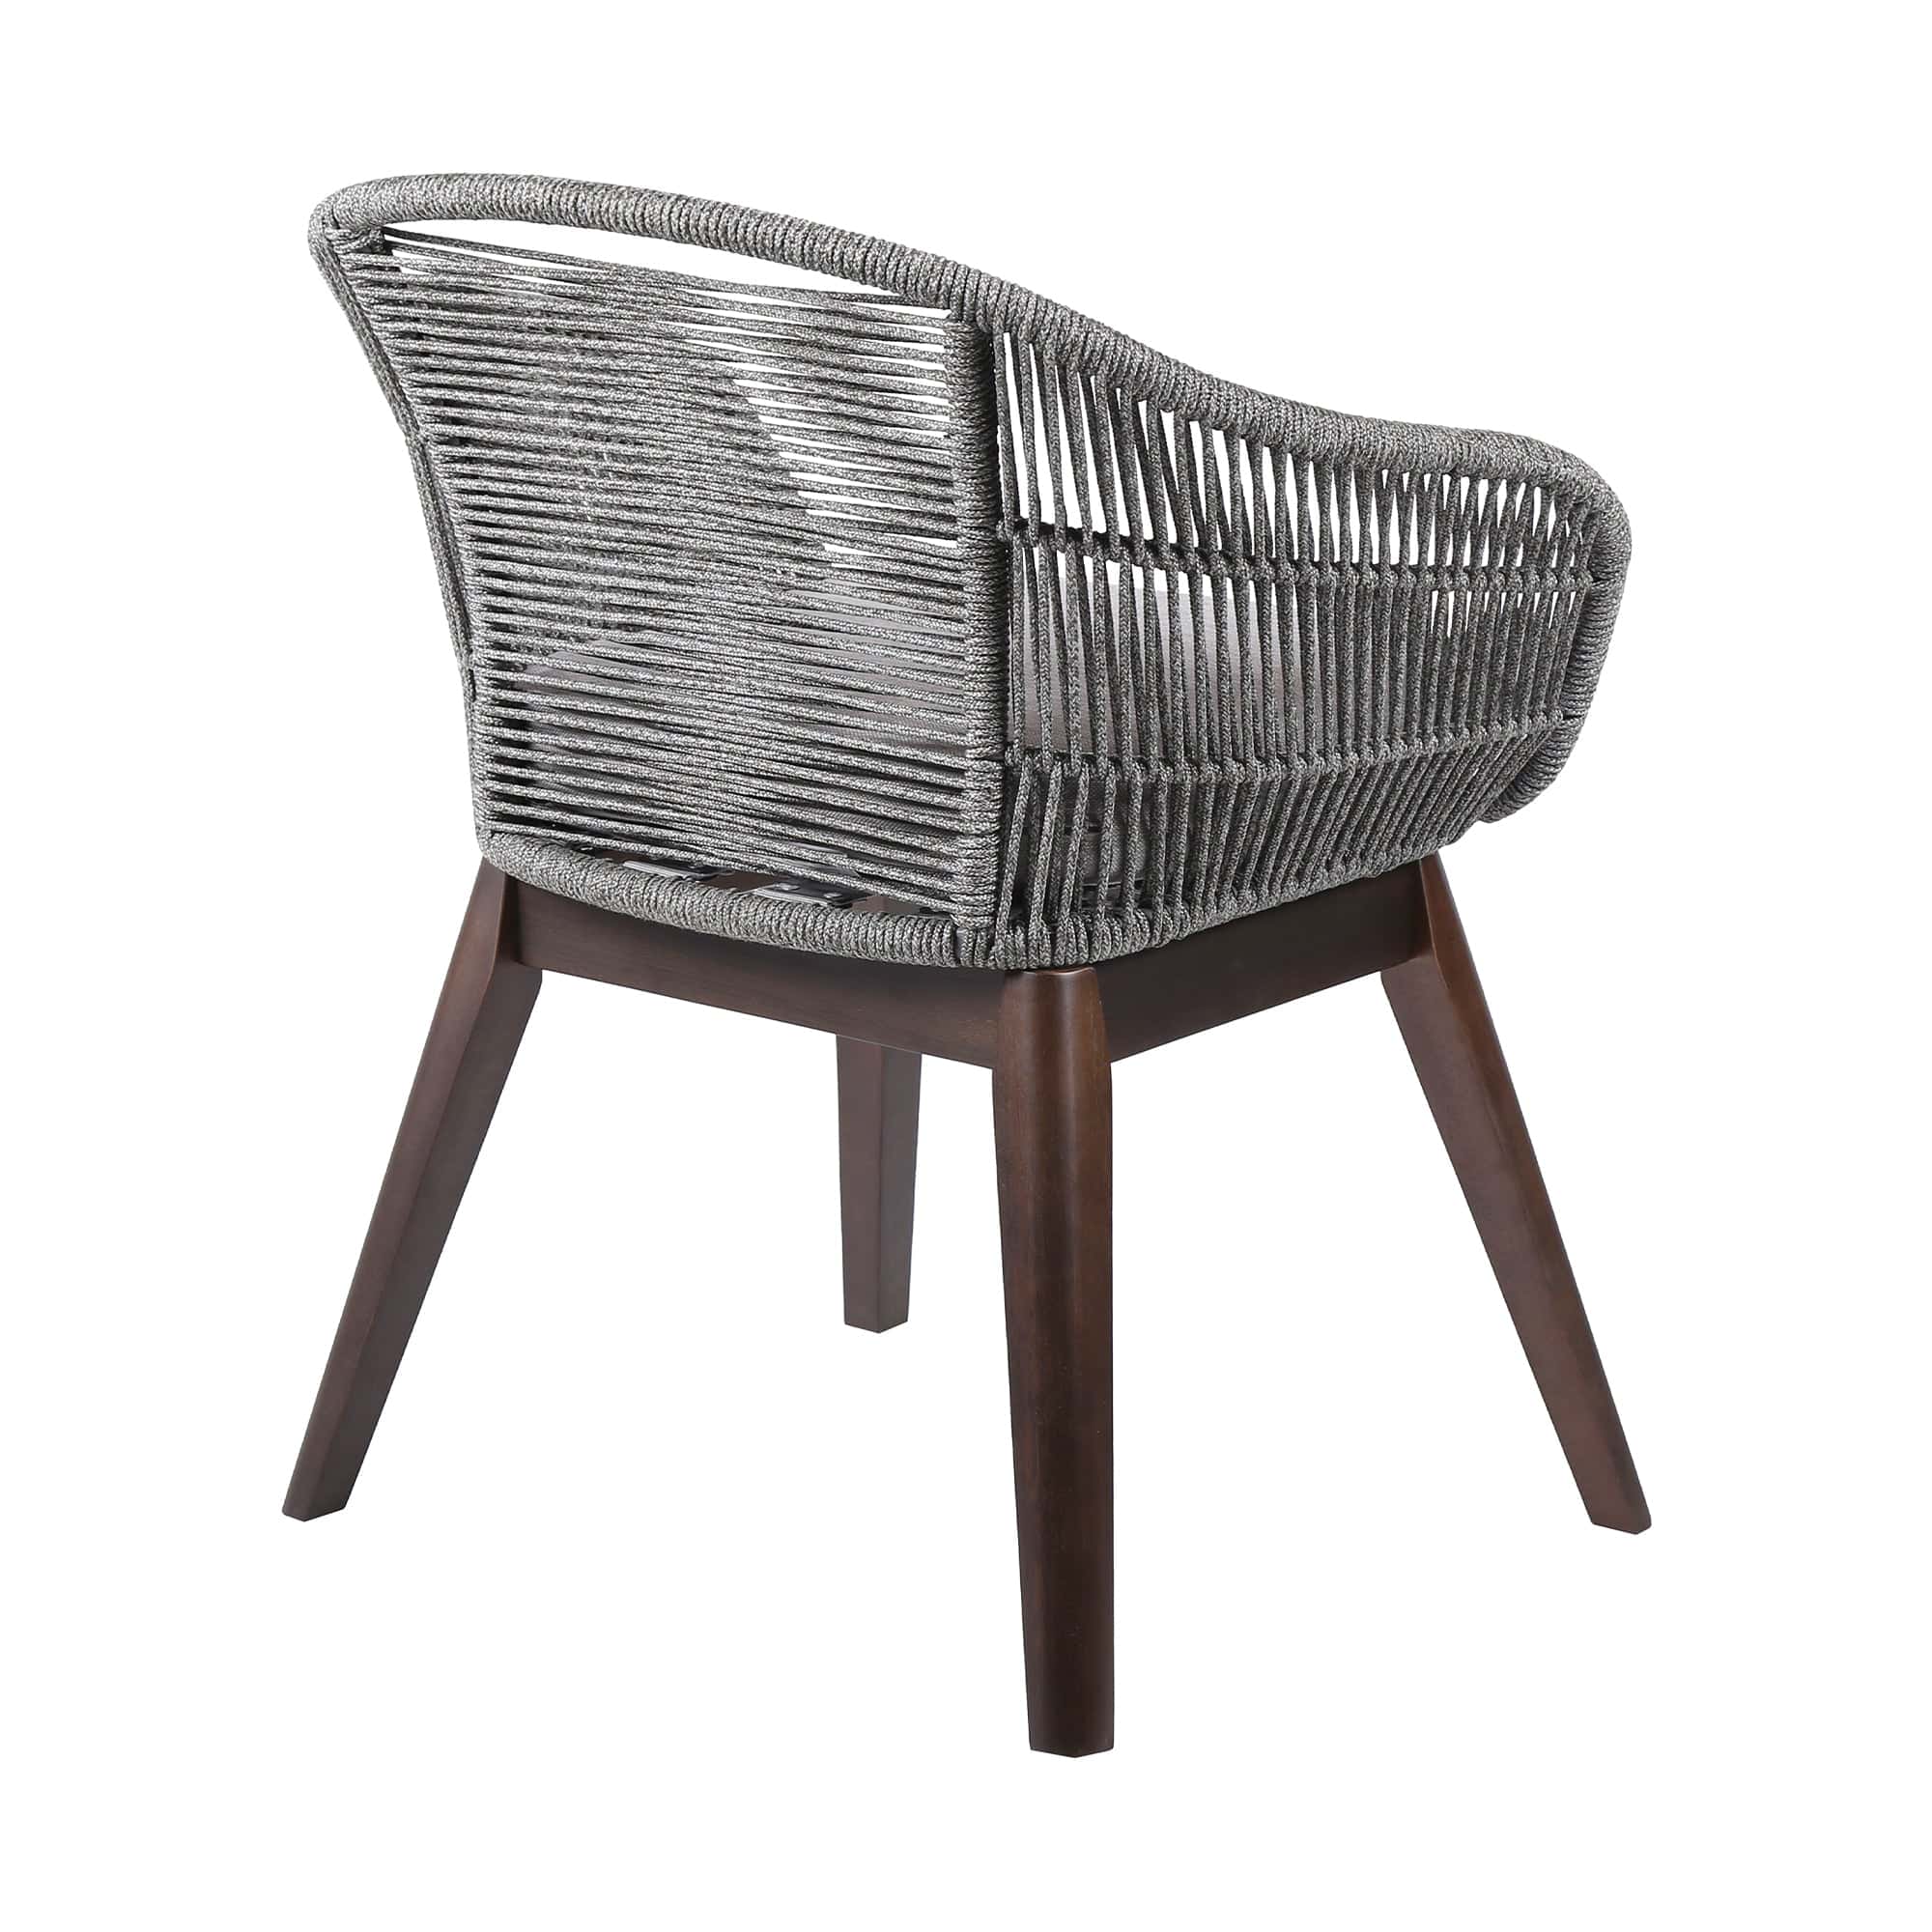 Armen Living Outdoor Dining Chair Armen Living | Tutti Frutti Indoor Outdoor Dining Chair in Dark Eucalyptus Wood with Latte Rope and Grey Cushions | LCTFSIGRY